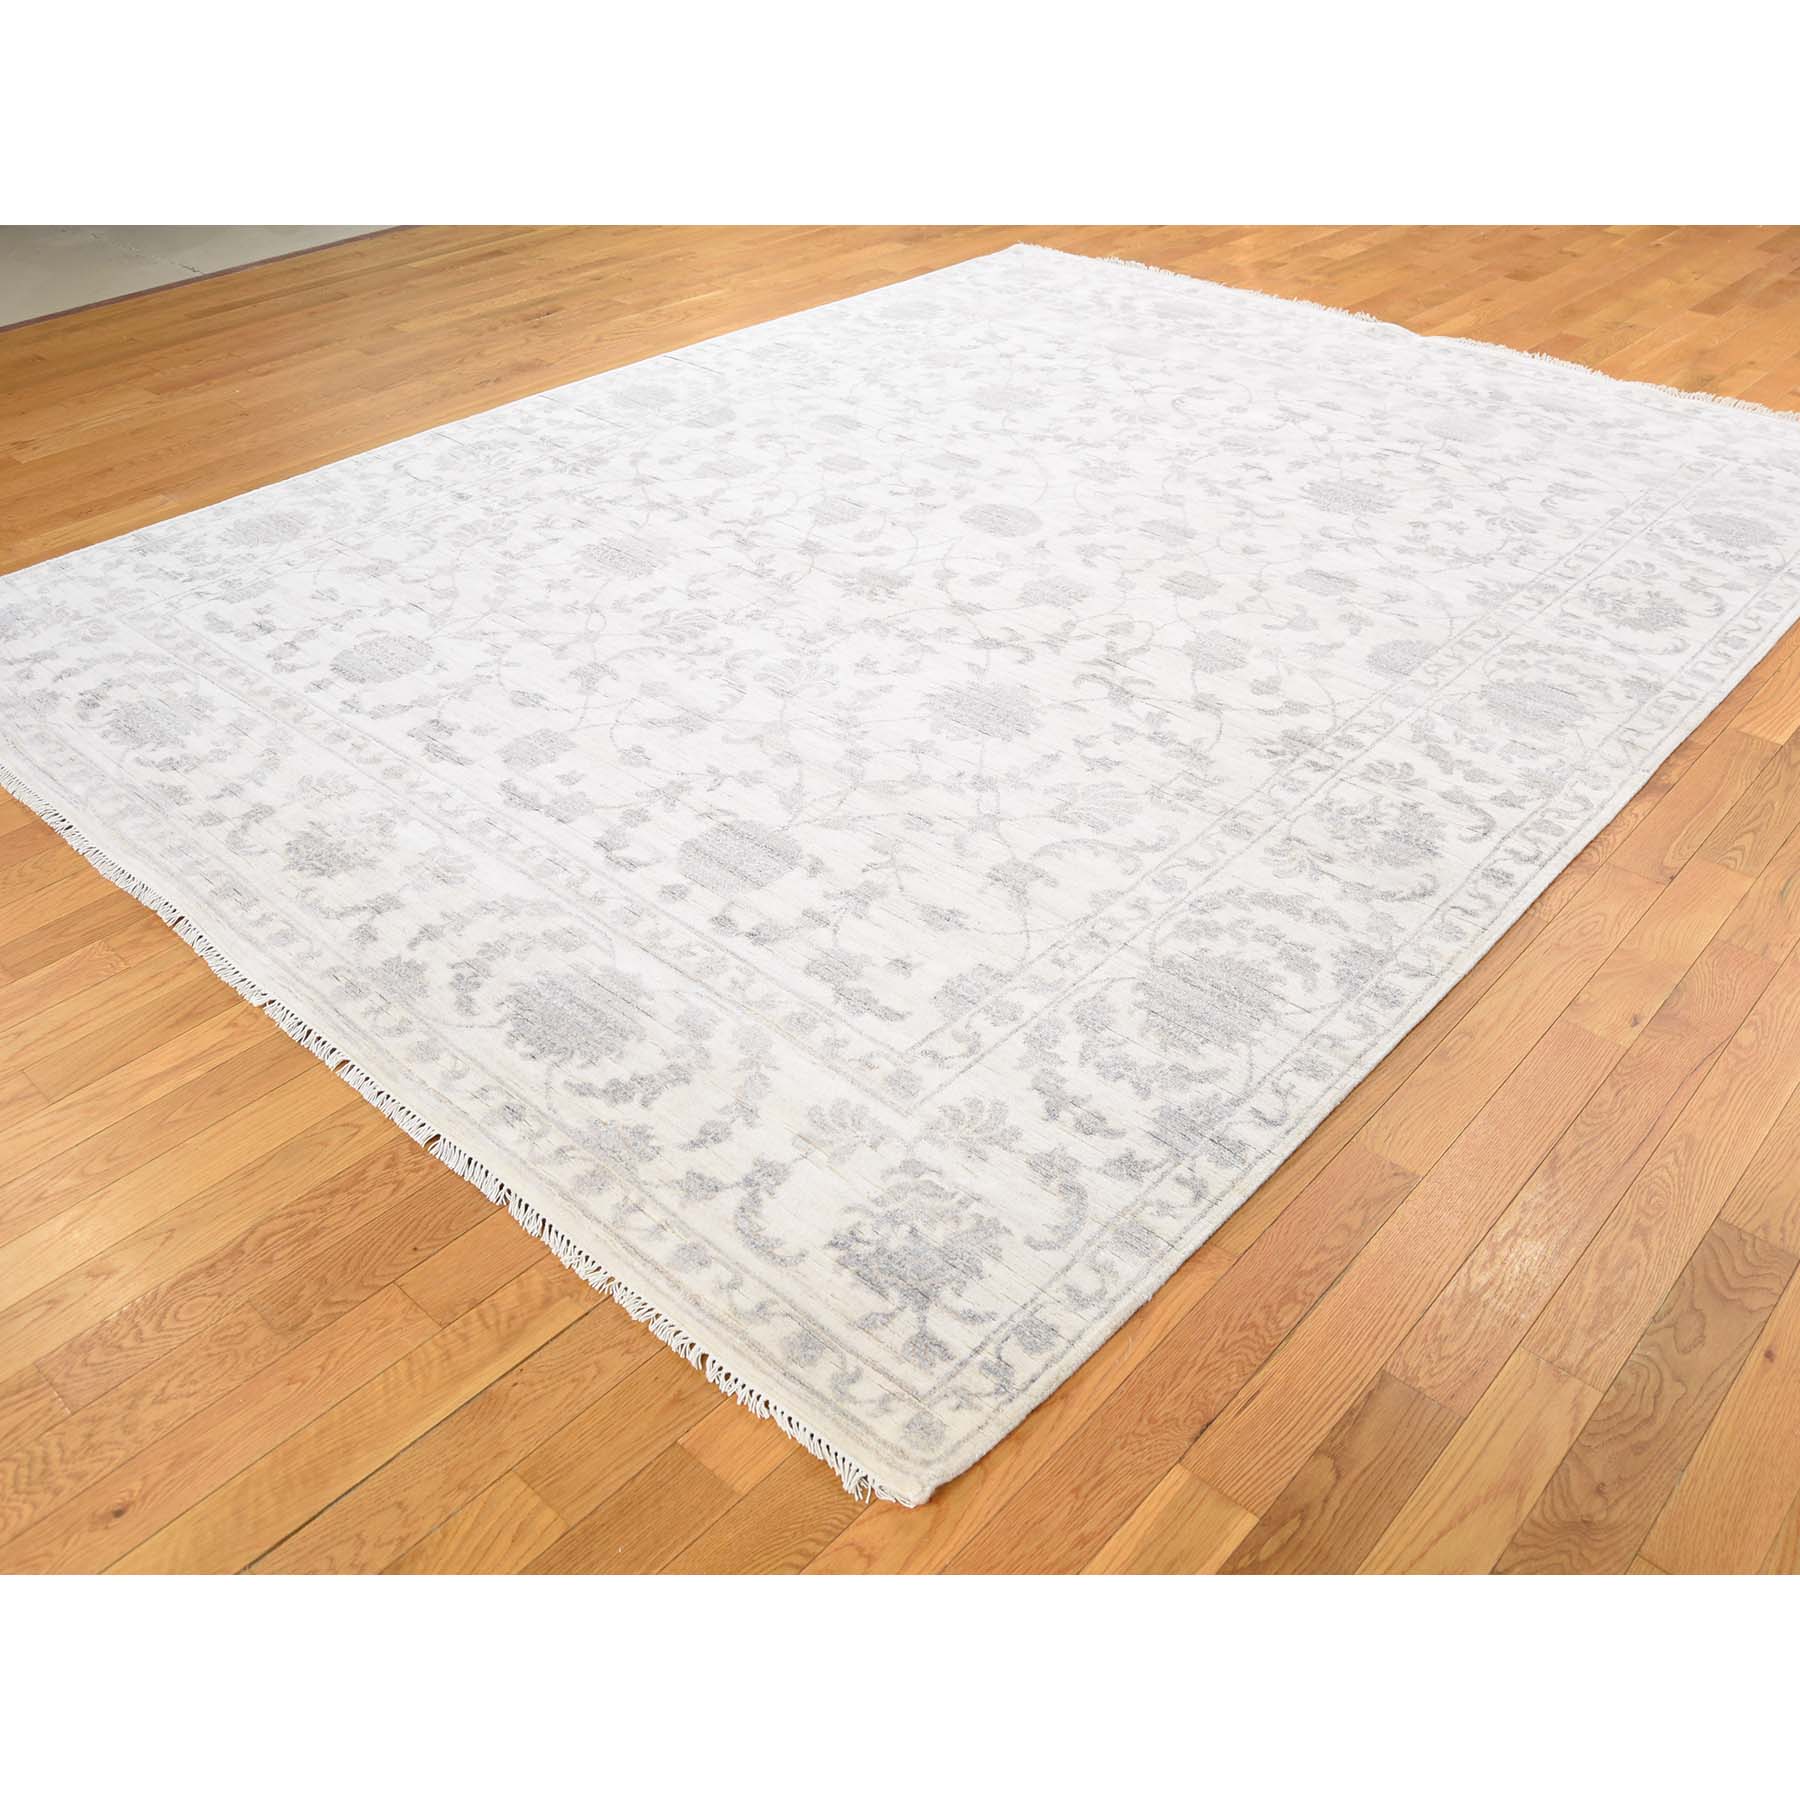 8-1 x10-3  Wool and Silk Tone on Tone Agra Hand-Knotted Oriental Rug 